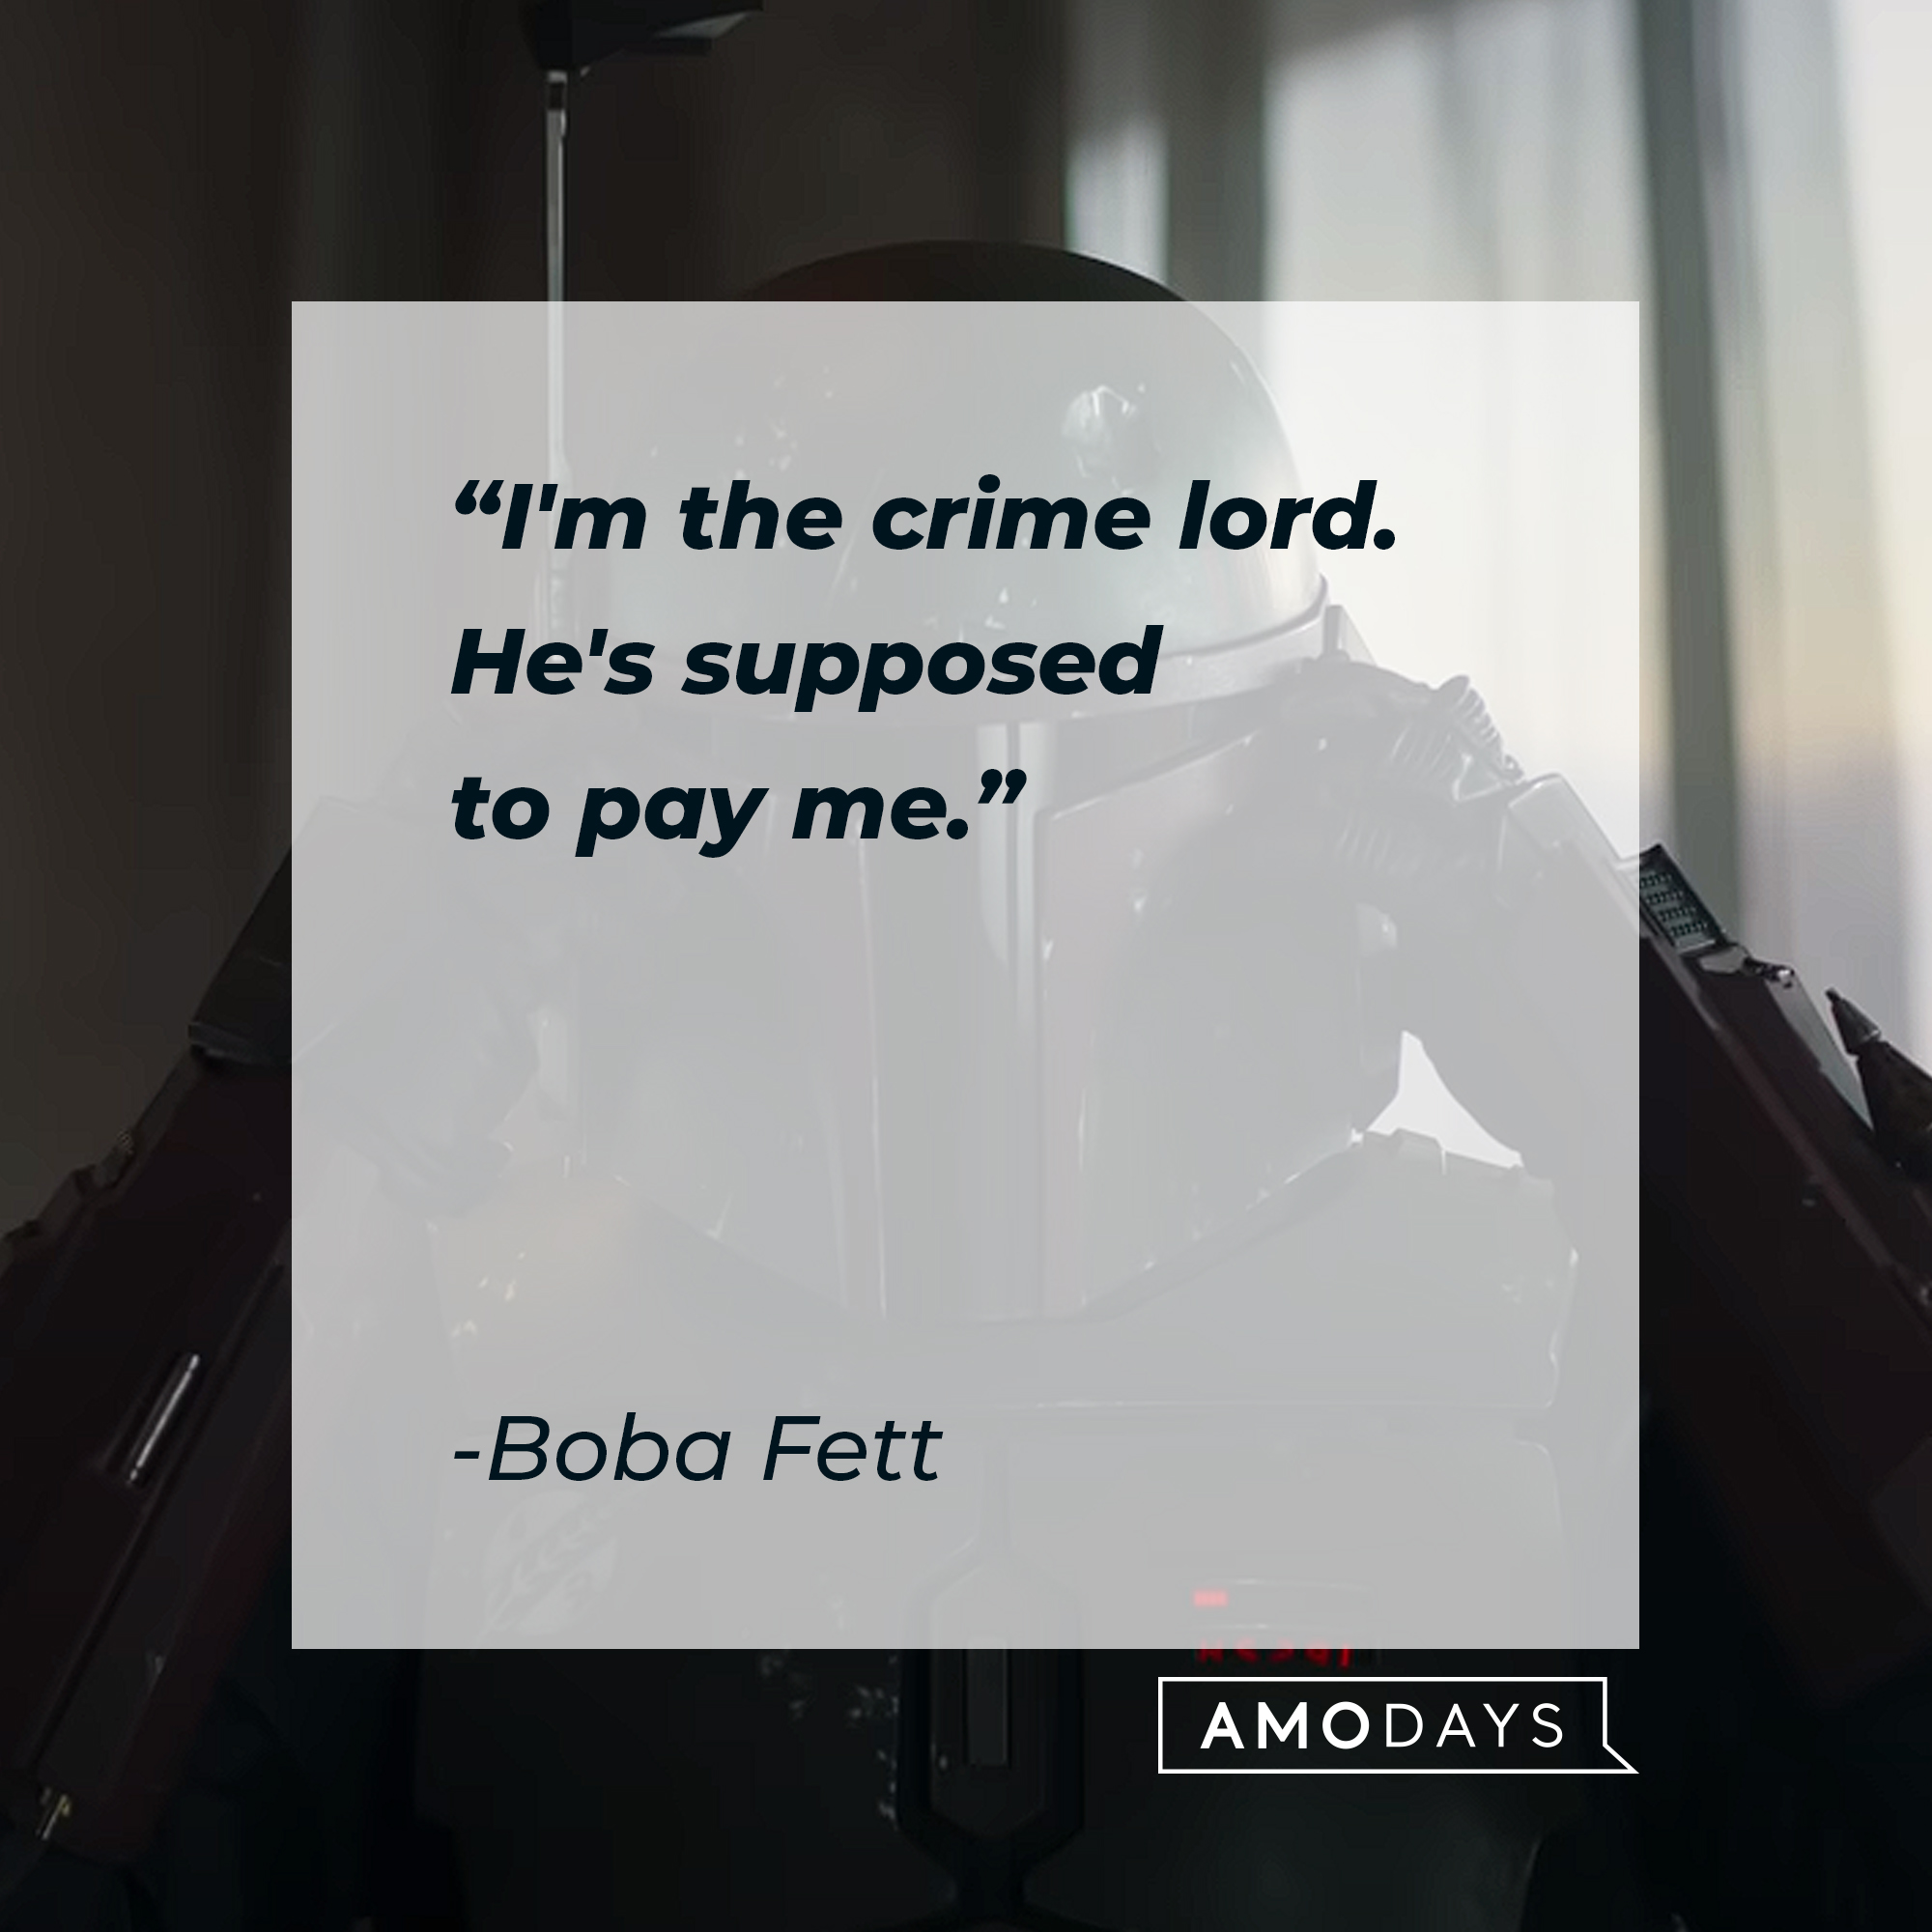 Boba Fett's quote: "I'm the crime lord. He's supposed to pay me." | Source: youtube.com/StarWars